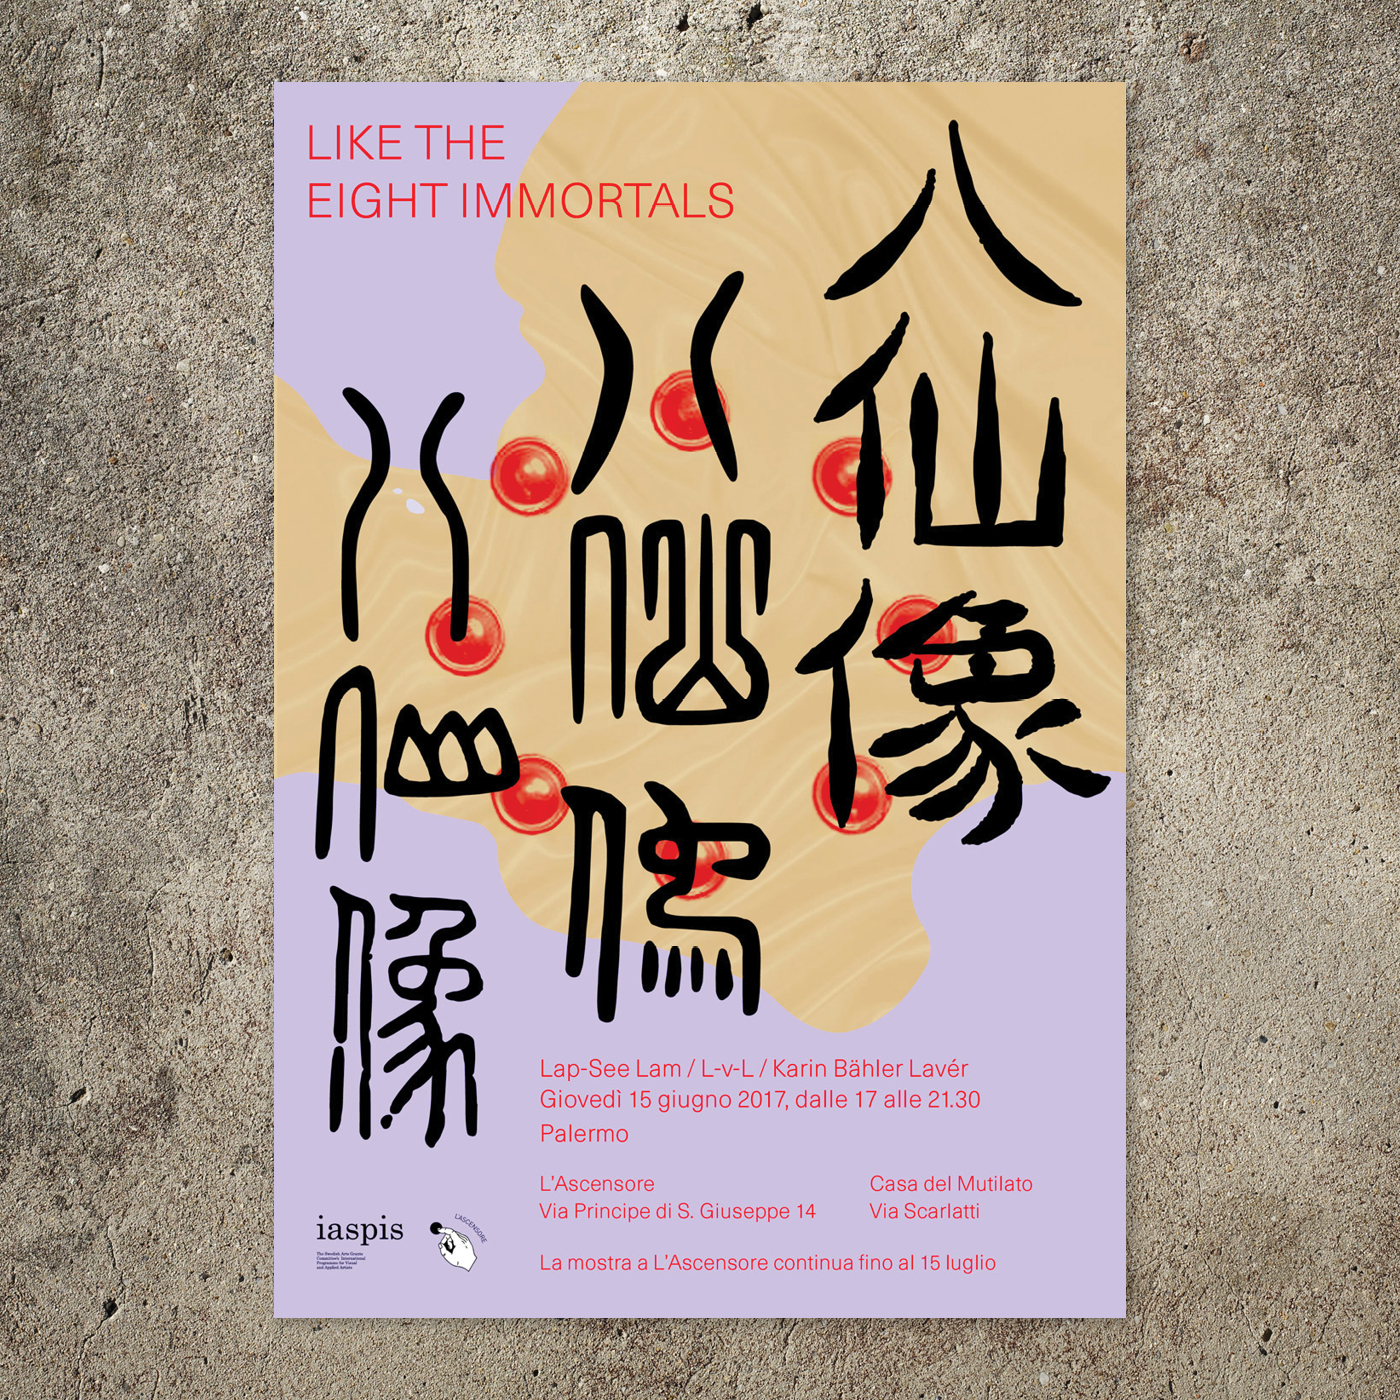 Like the 8 Immortals – poster. Designed by Thomas Bush